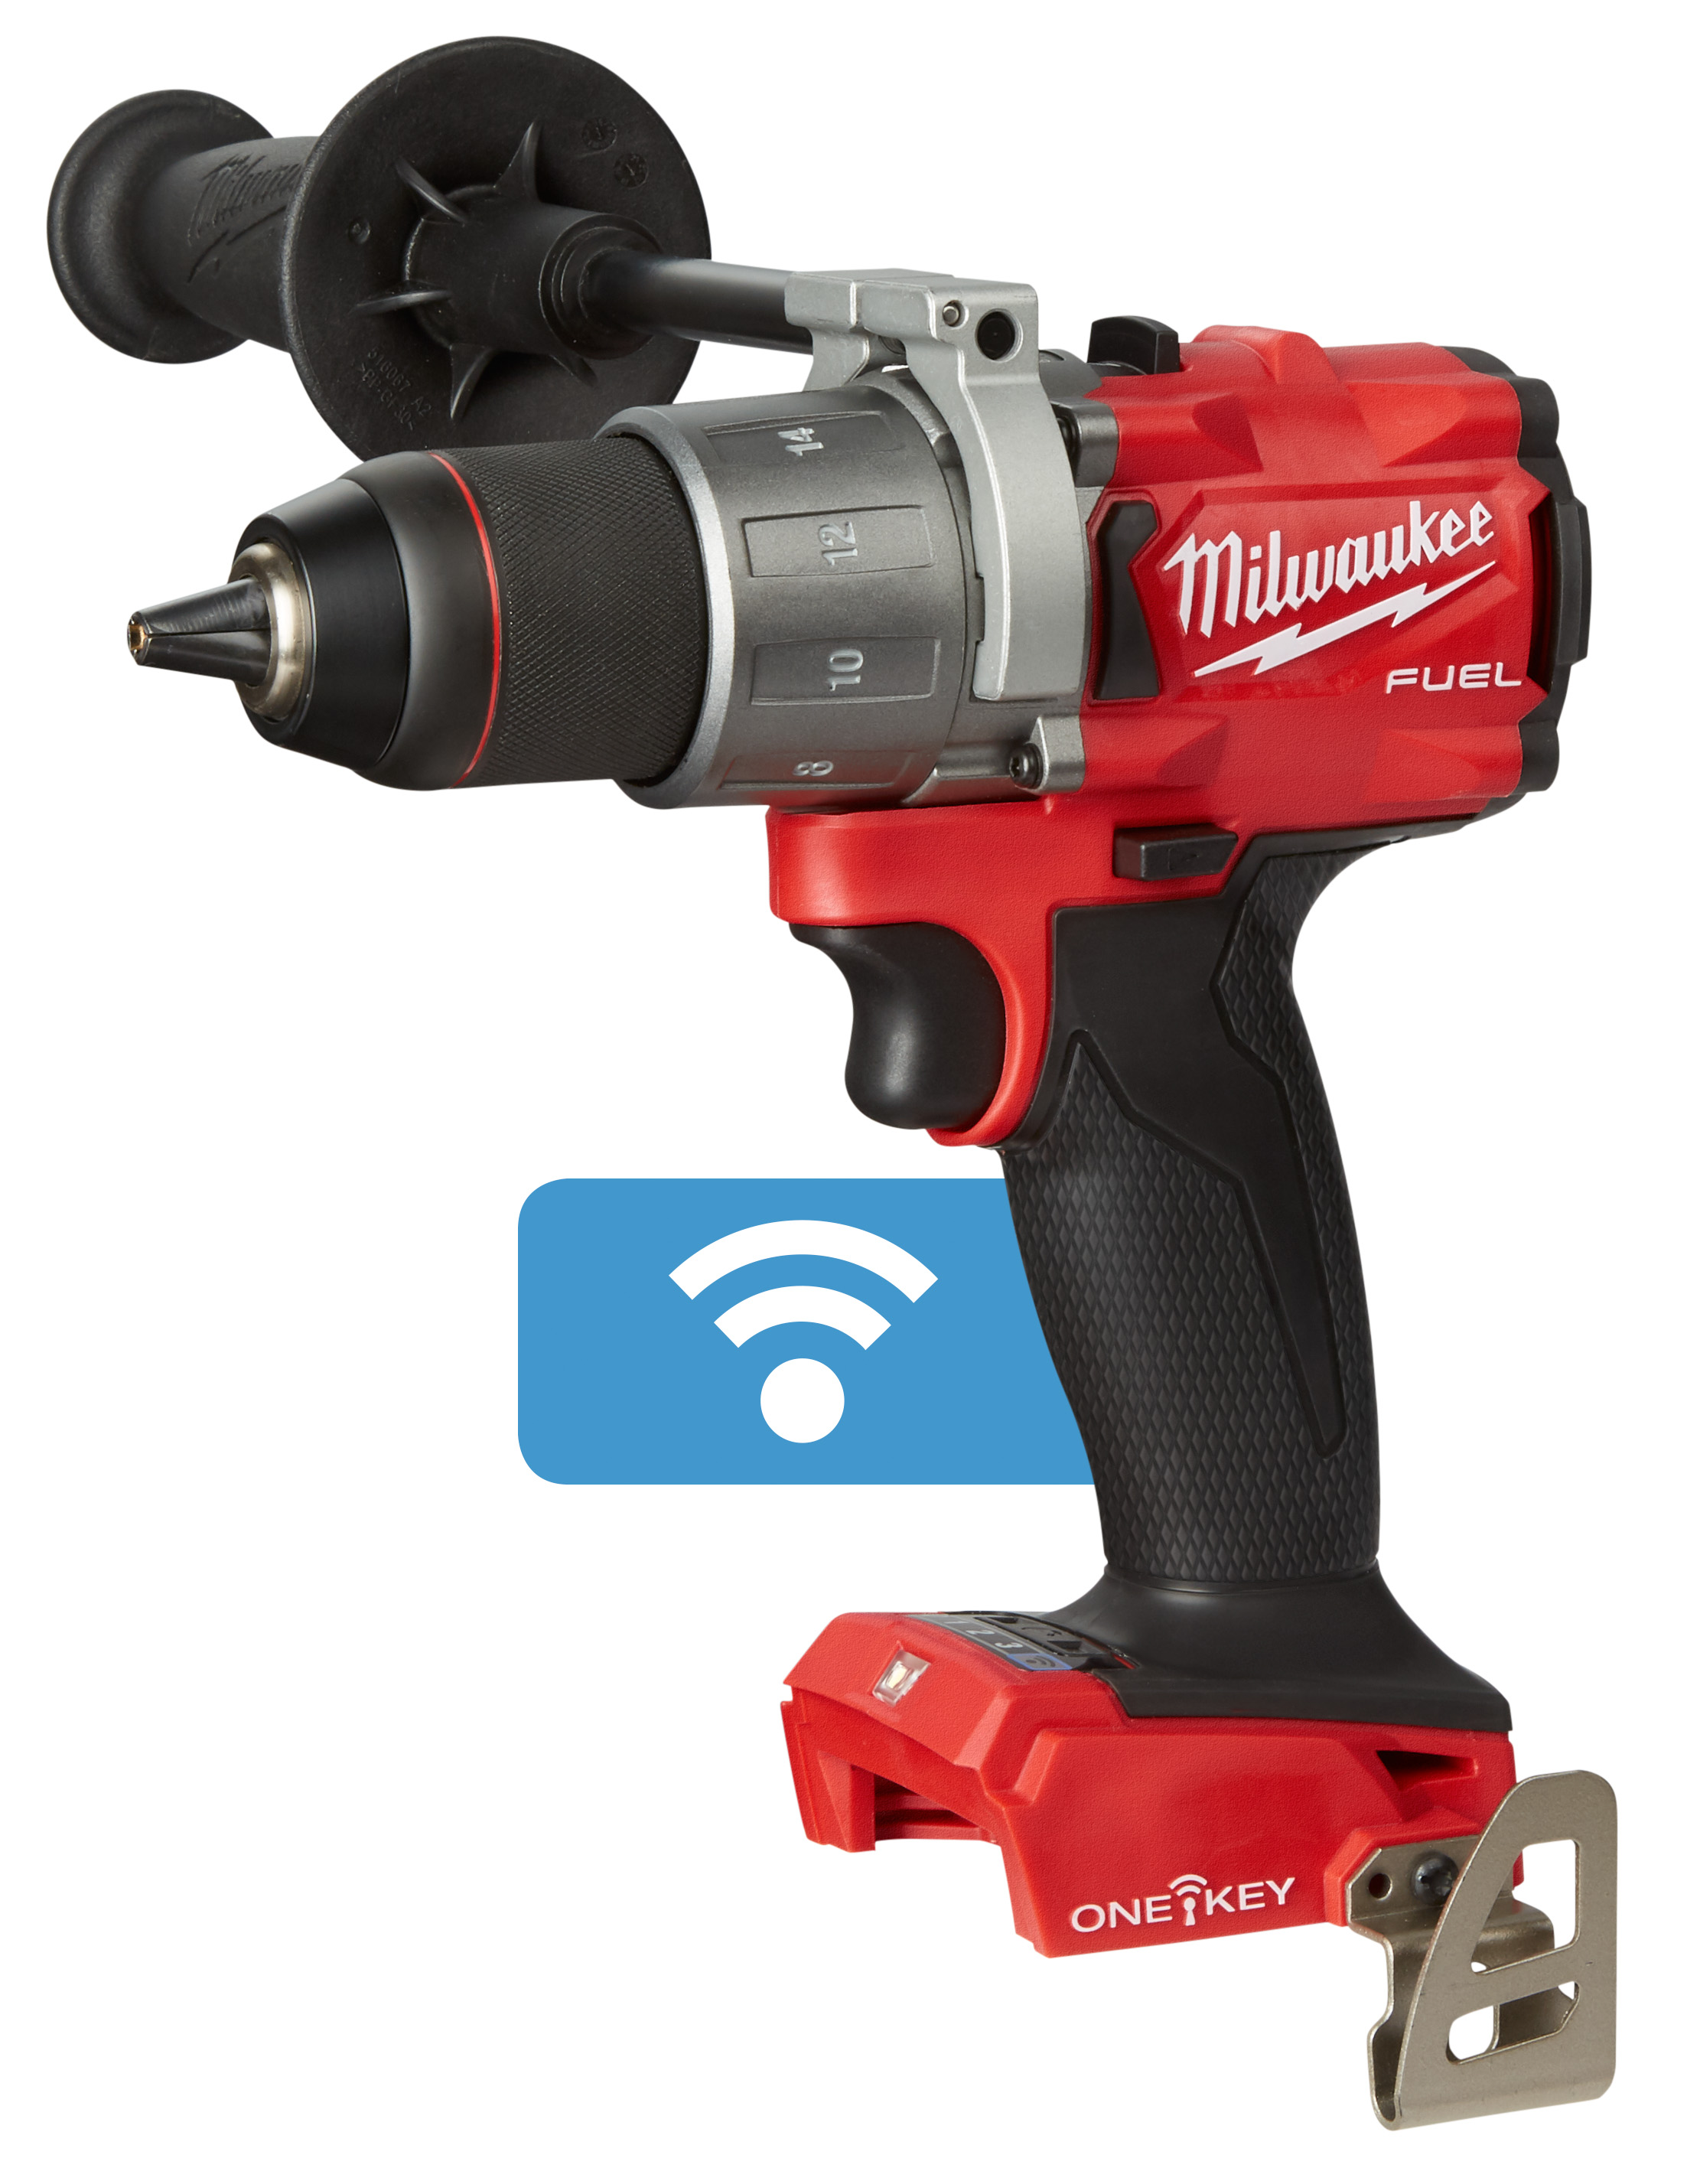 M18 FUEL ONE-KEY 18 Volt Lithium-Ion Cordless 1/2 in. Drill - Tool Only